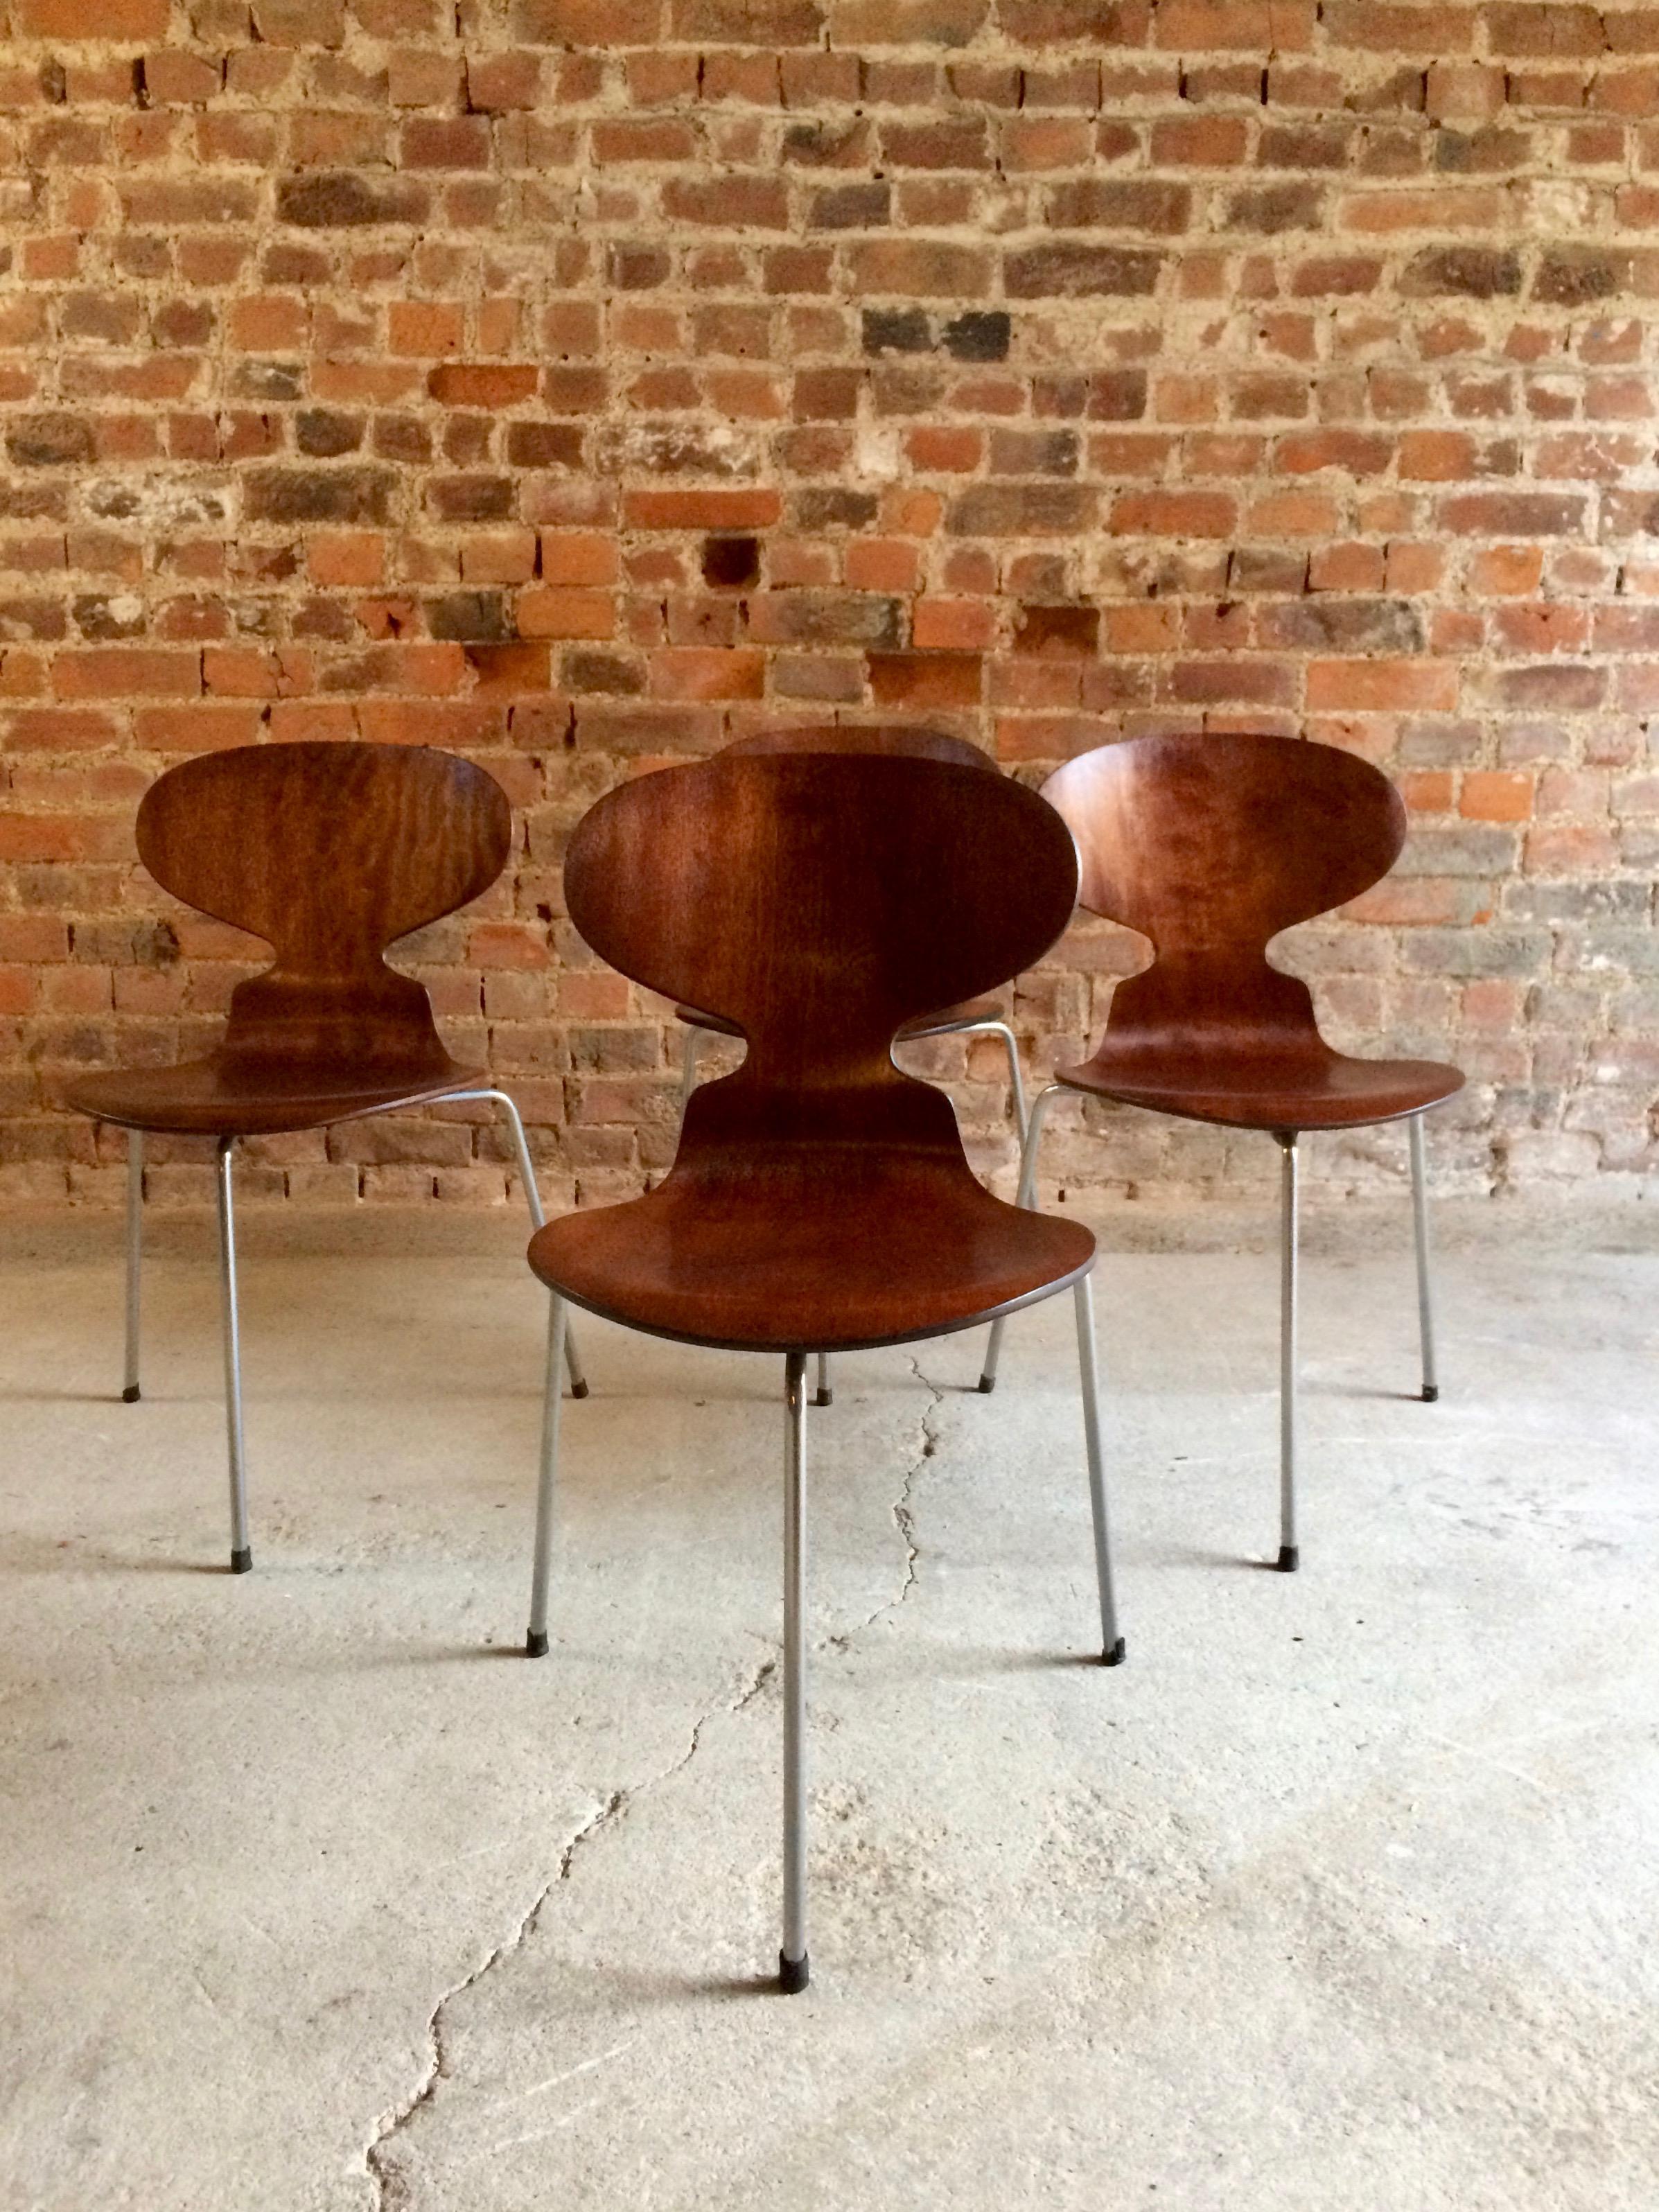 Magnificent midcentury Danish Arne Jacobsen for Fritz Hansen dining table fitted with chromed steel legs model 3600 with a set of four 'The Ant’ chairs in bent, laminated ply fitted with steel legs model 3100, this is an original early 1950s model